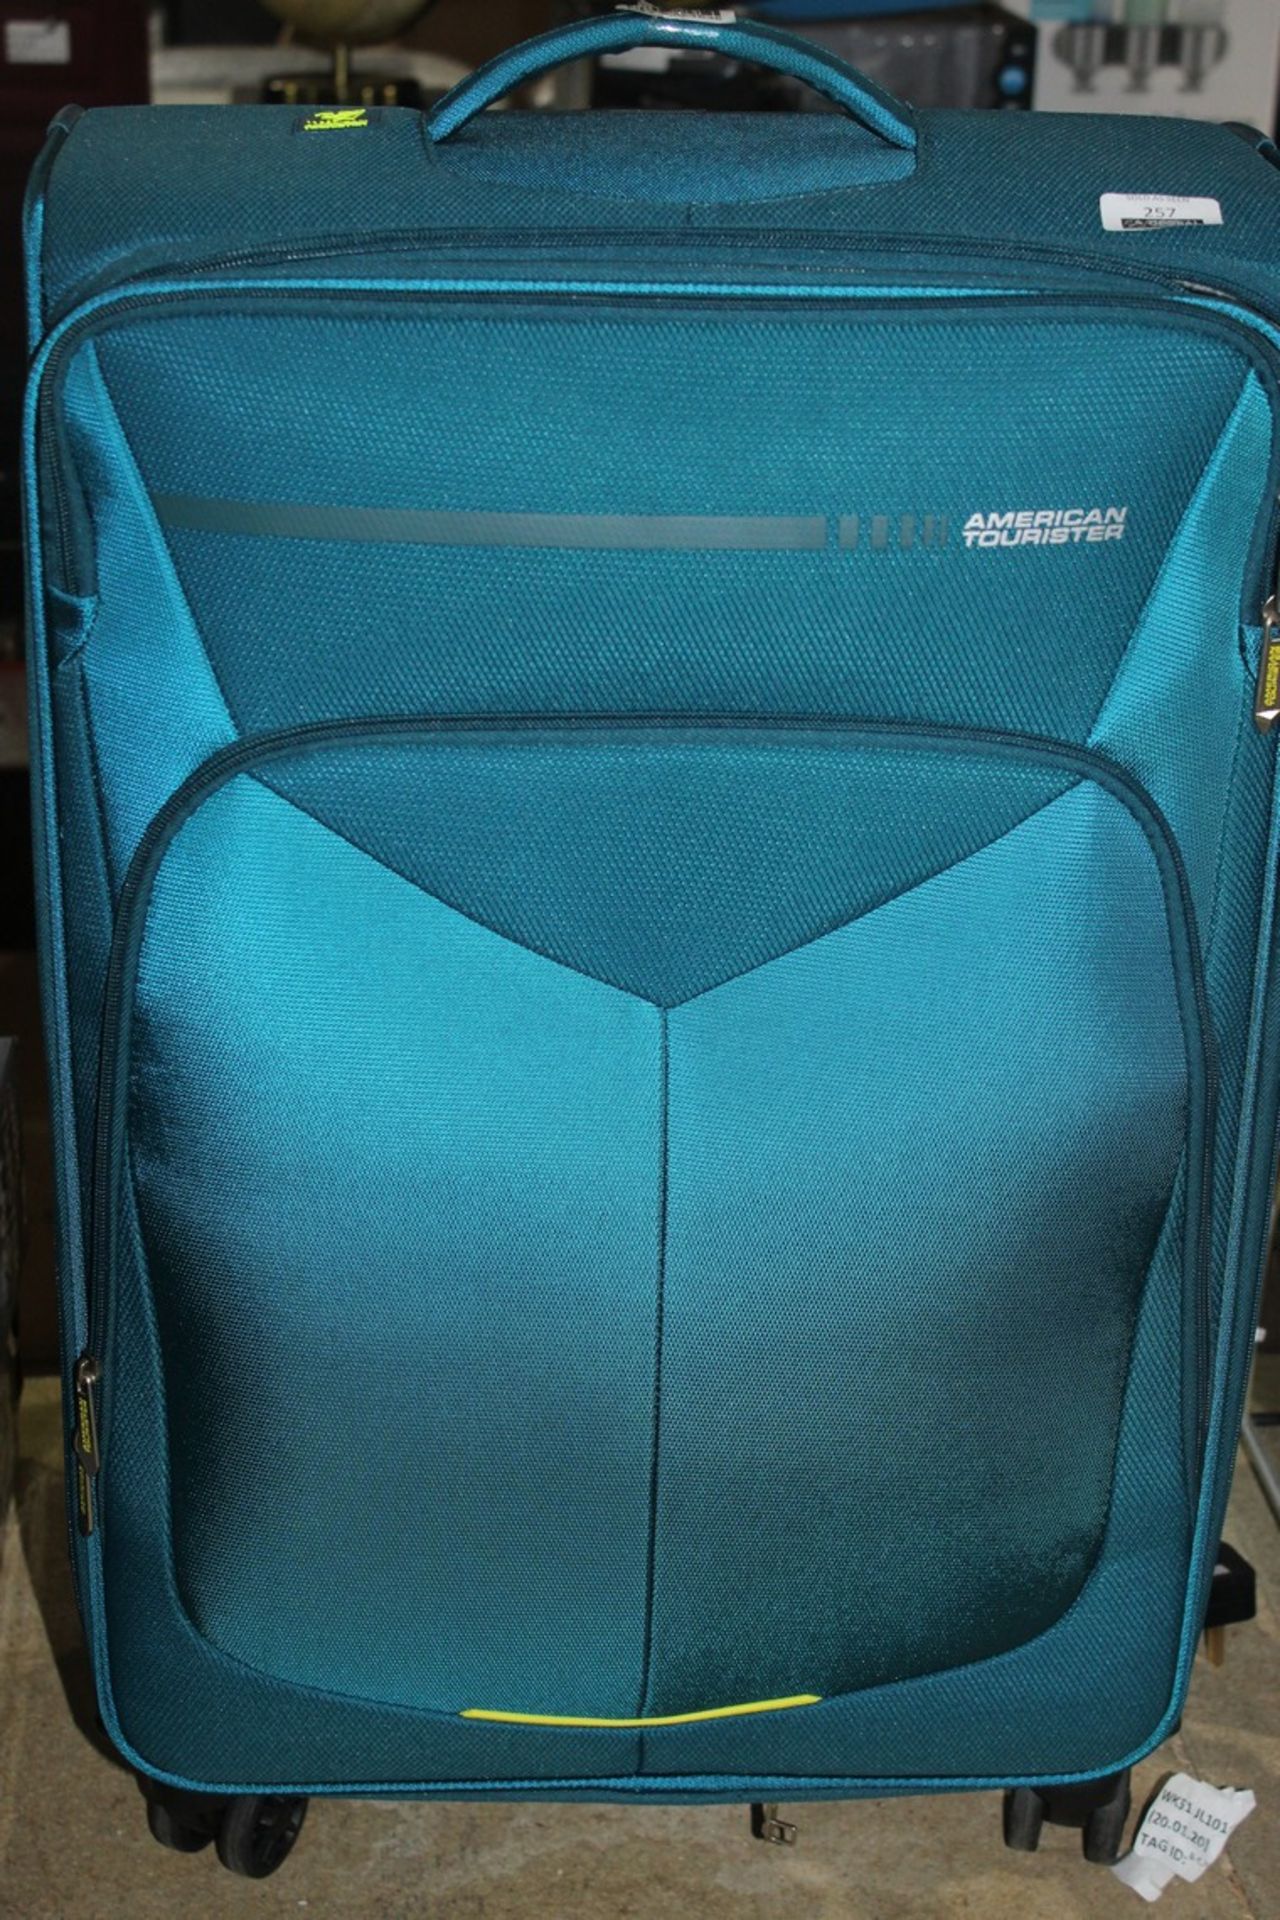 American Tourister, Teal Blue, Soft Shell Spinner Suitcase, RRP£125.00 (RET00621638) (Public Viewing